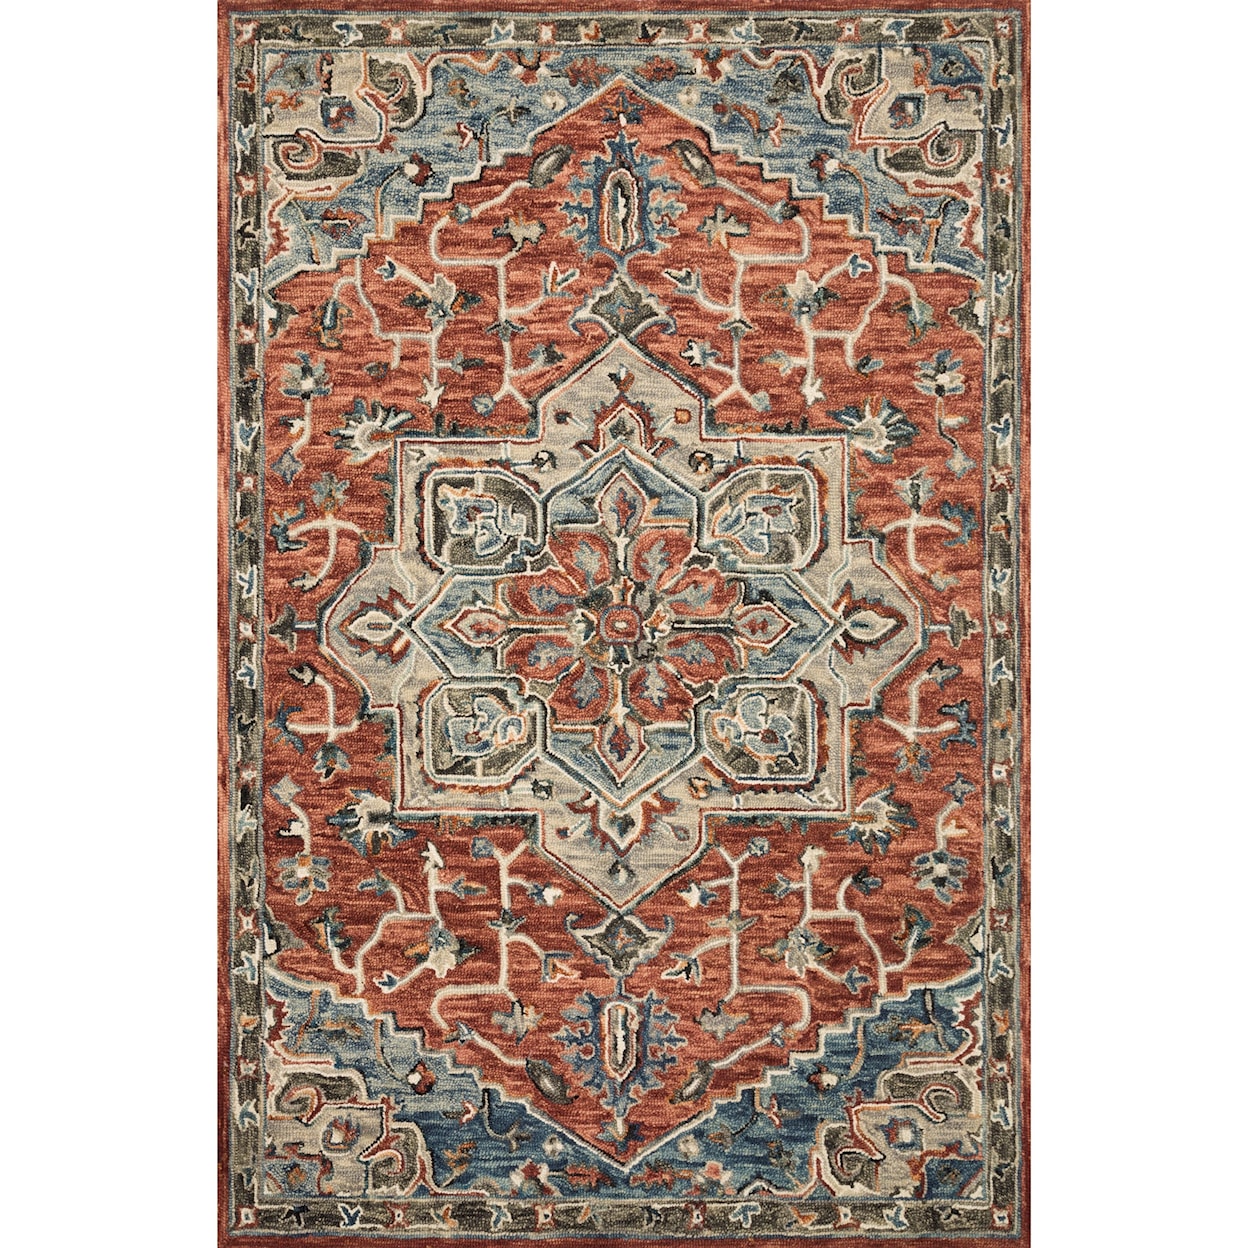 Reeds Rugs Victoria 5'0" x 7'6" Red / Multi Rug